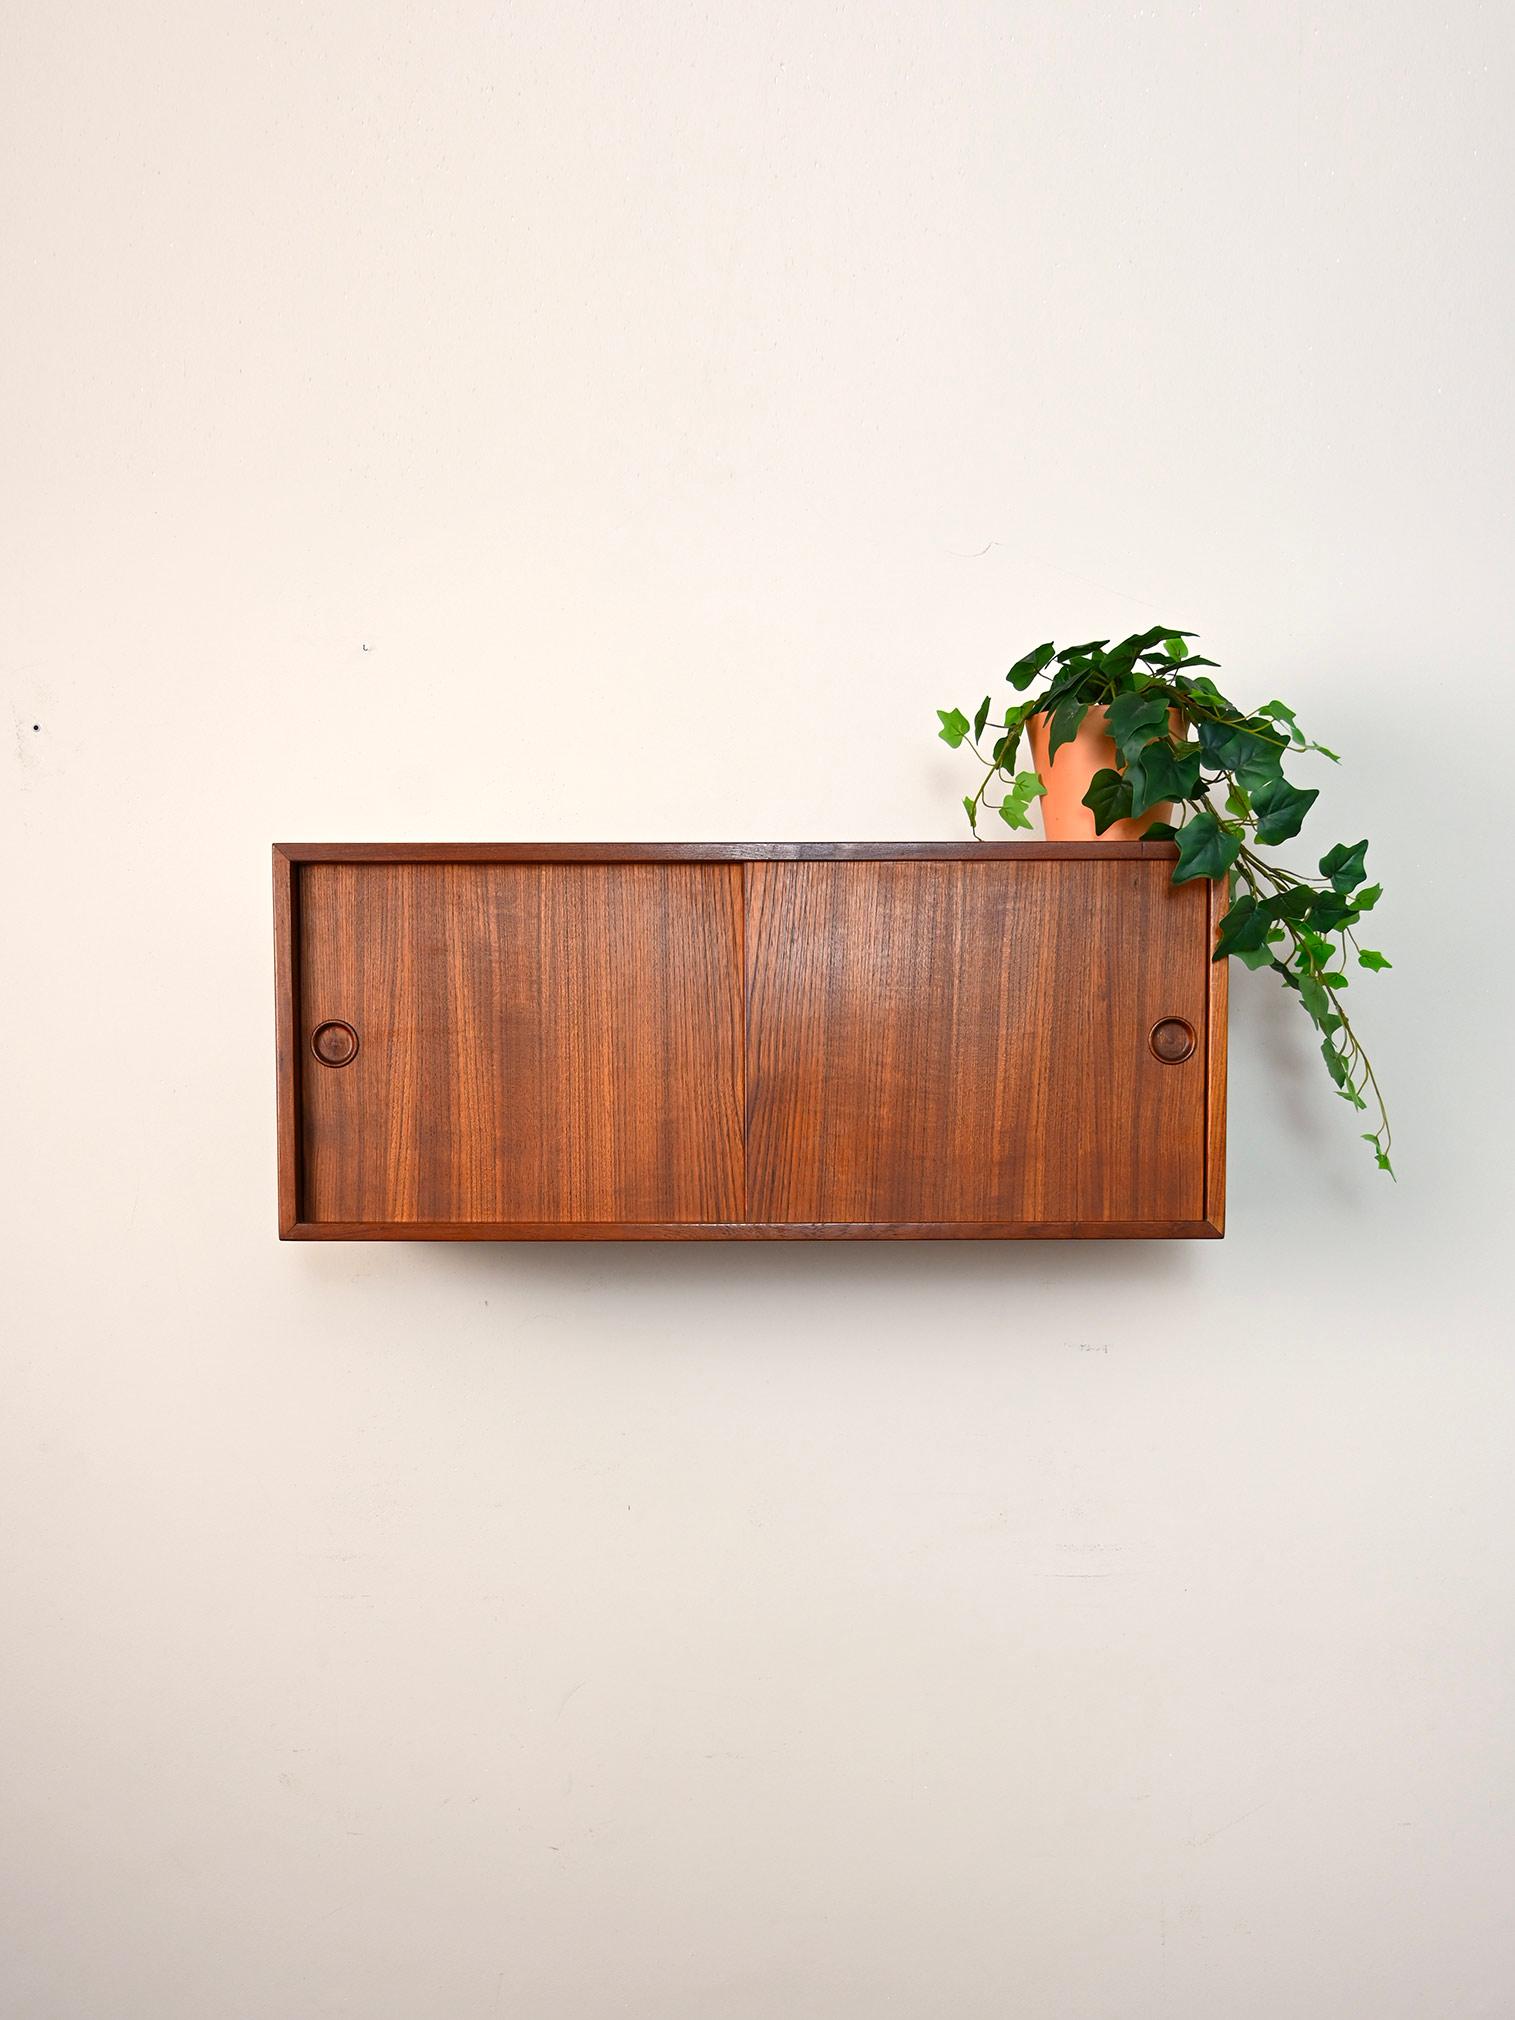 Scandinavian teak cabinet from the 1960s.

This Nordic piece of furniture thanks to its small size is ideal for the entrance hall or bathroom.
Consisting of a storage compartment with sliding doors, it will know how to make the room original.

Good